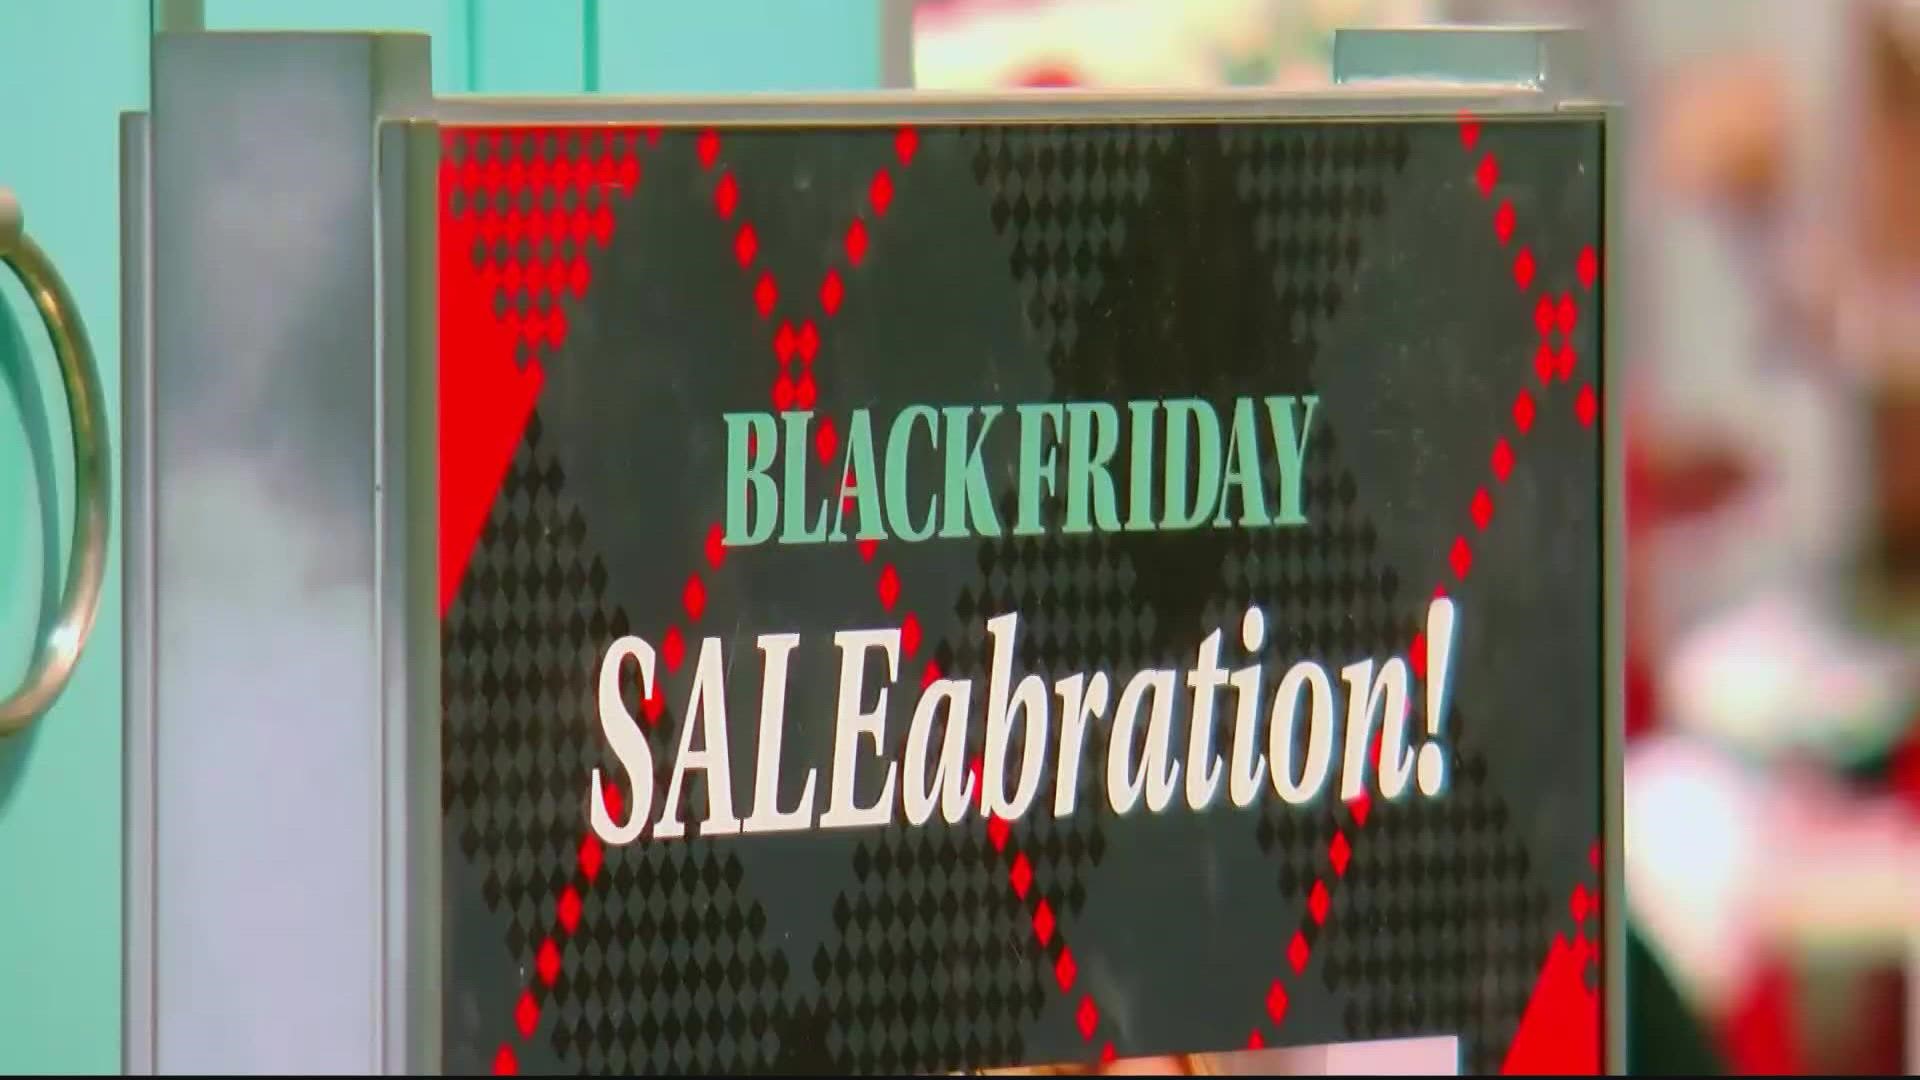 Great deals ahead for Black Friday.